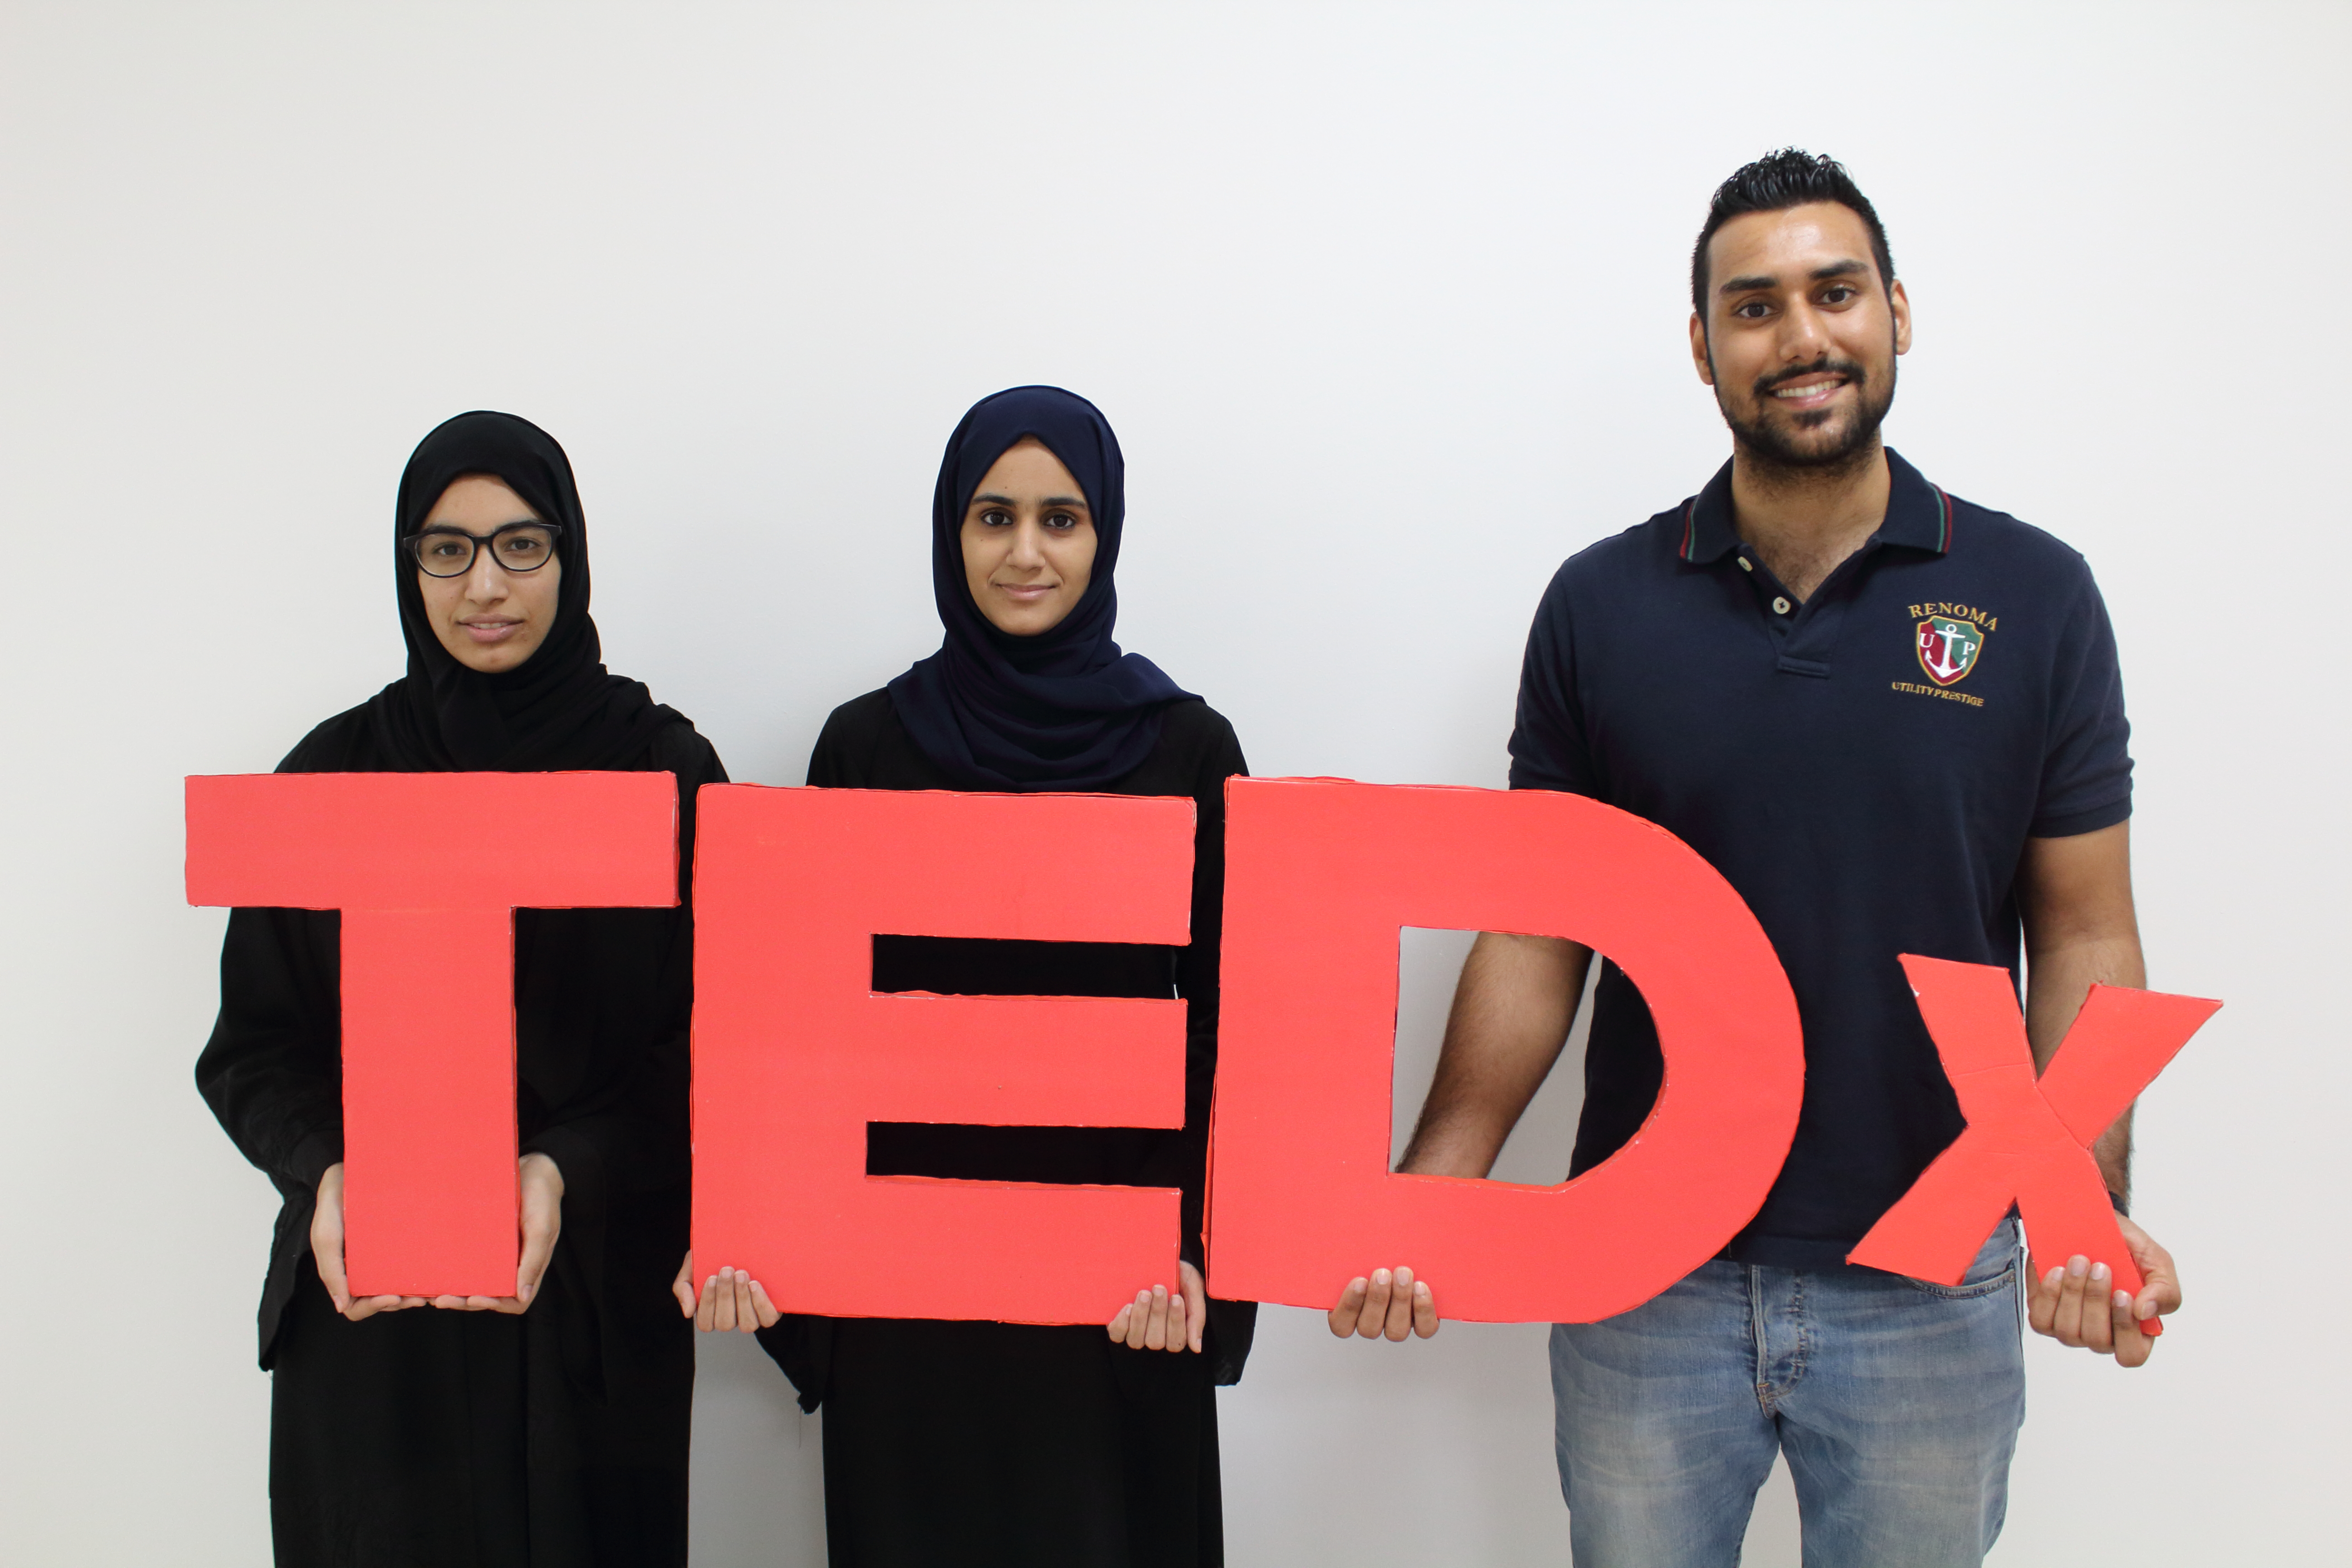 TEDx event inspires Oman Medical College students